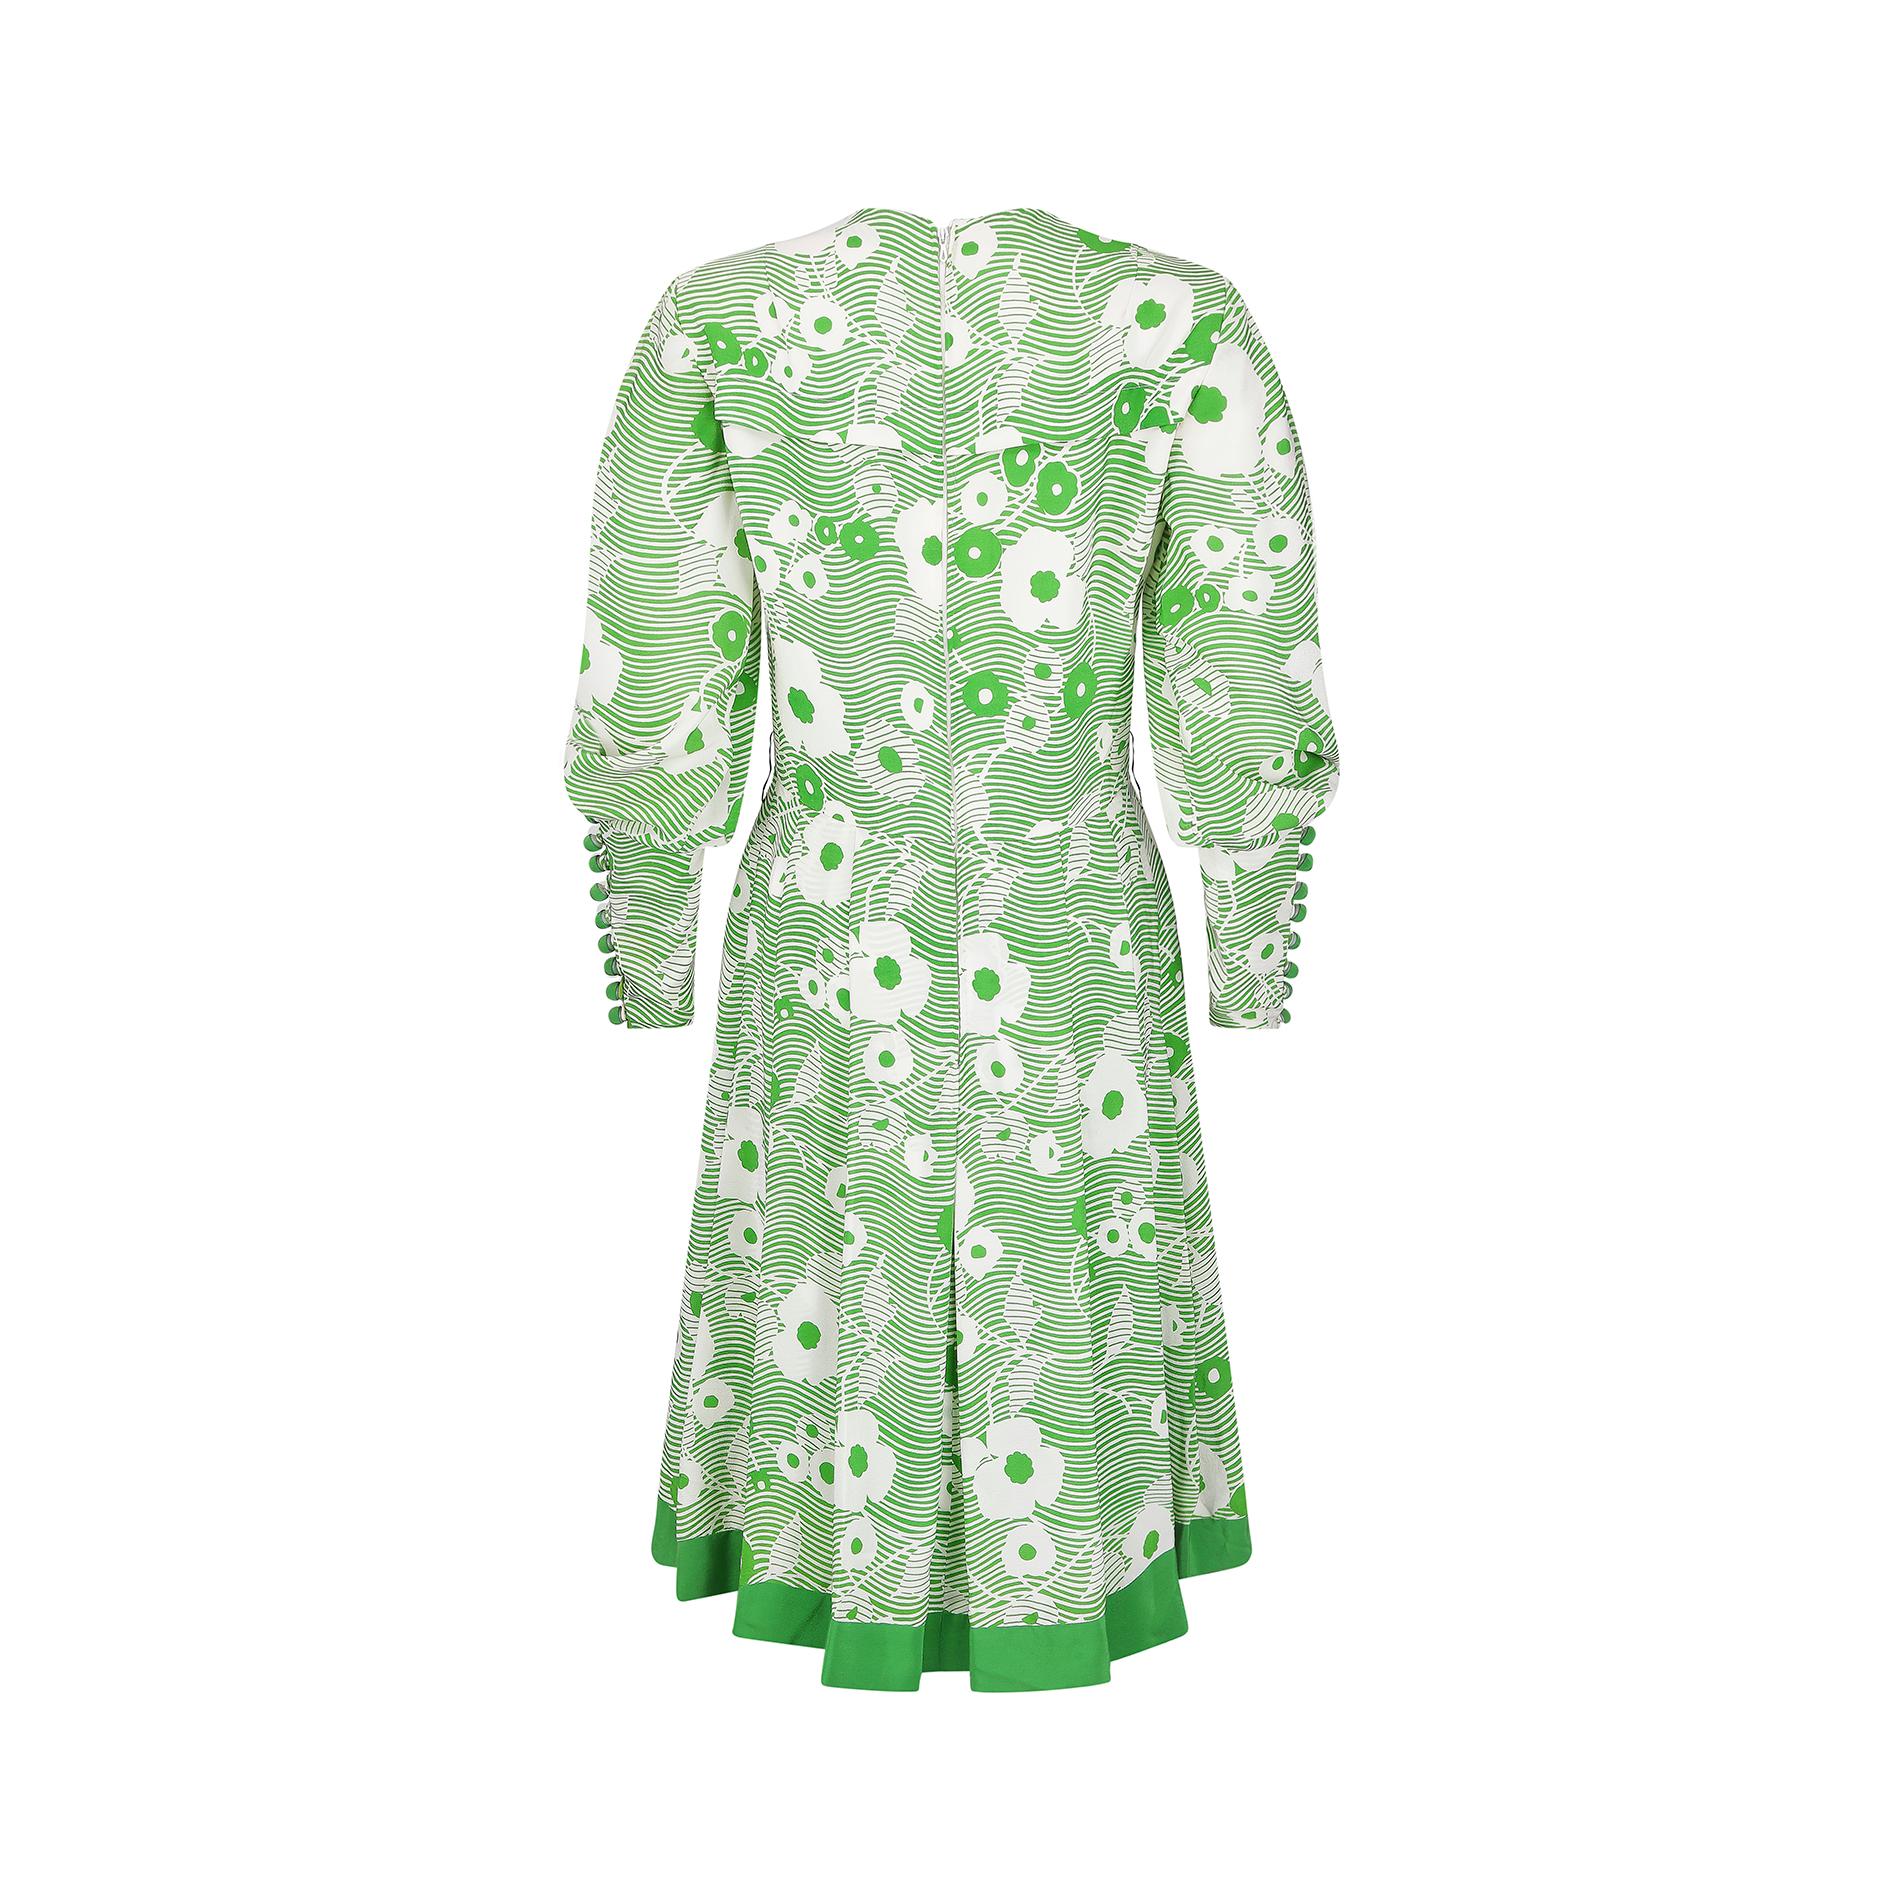 Women's 1970s French Haute Couture Green and White Floral Dress  For Sale